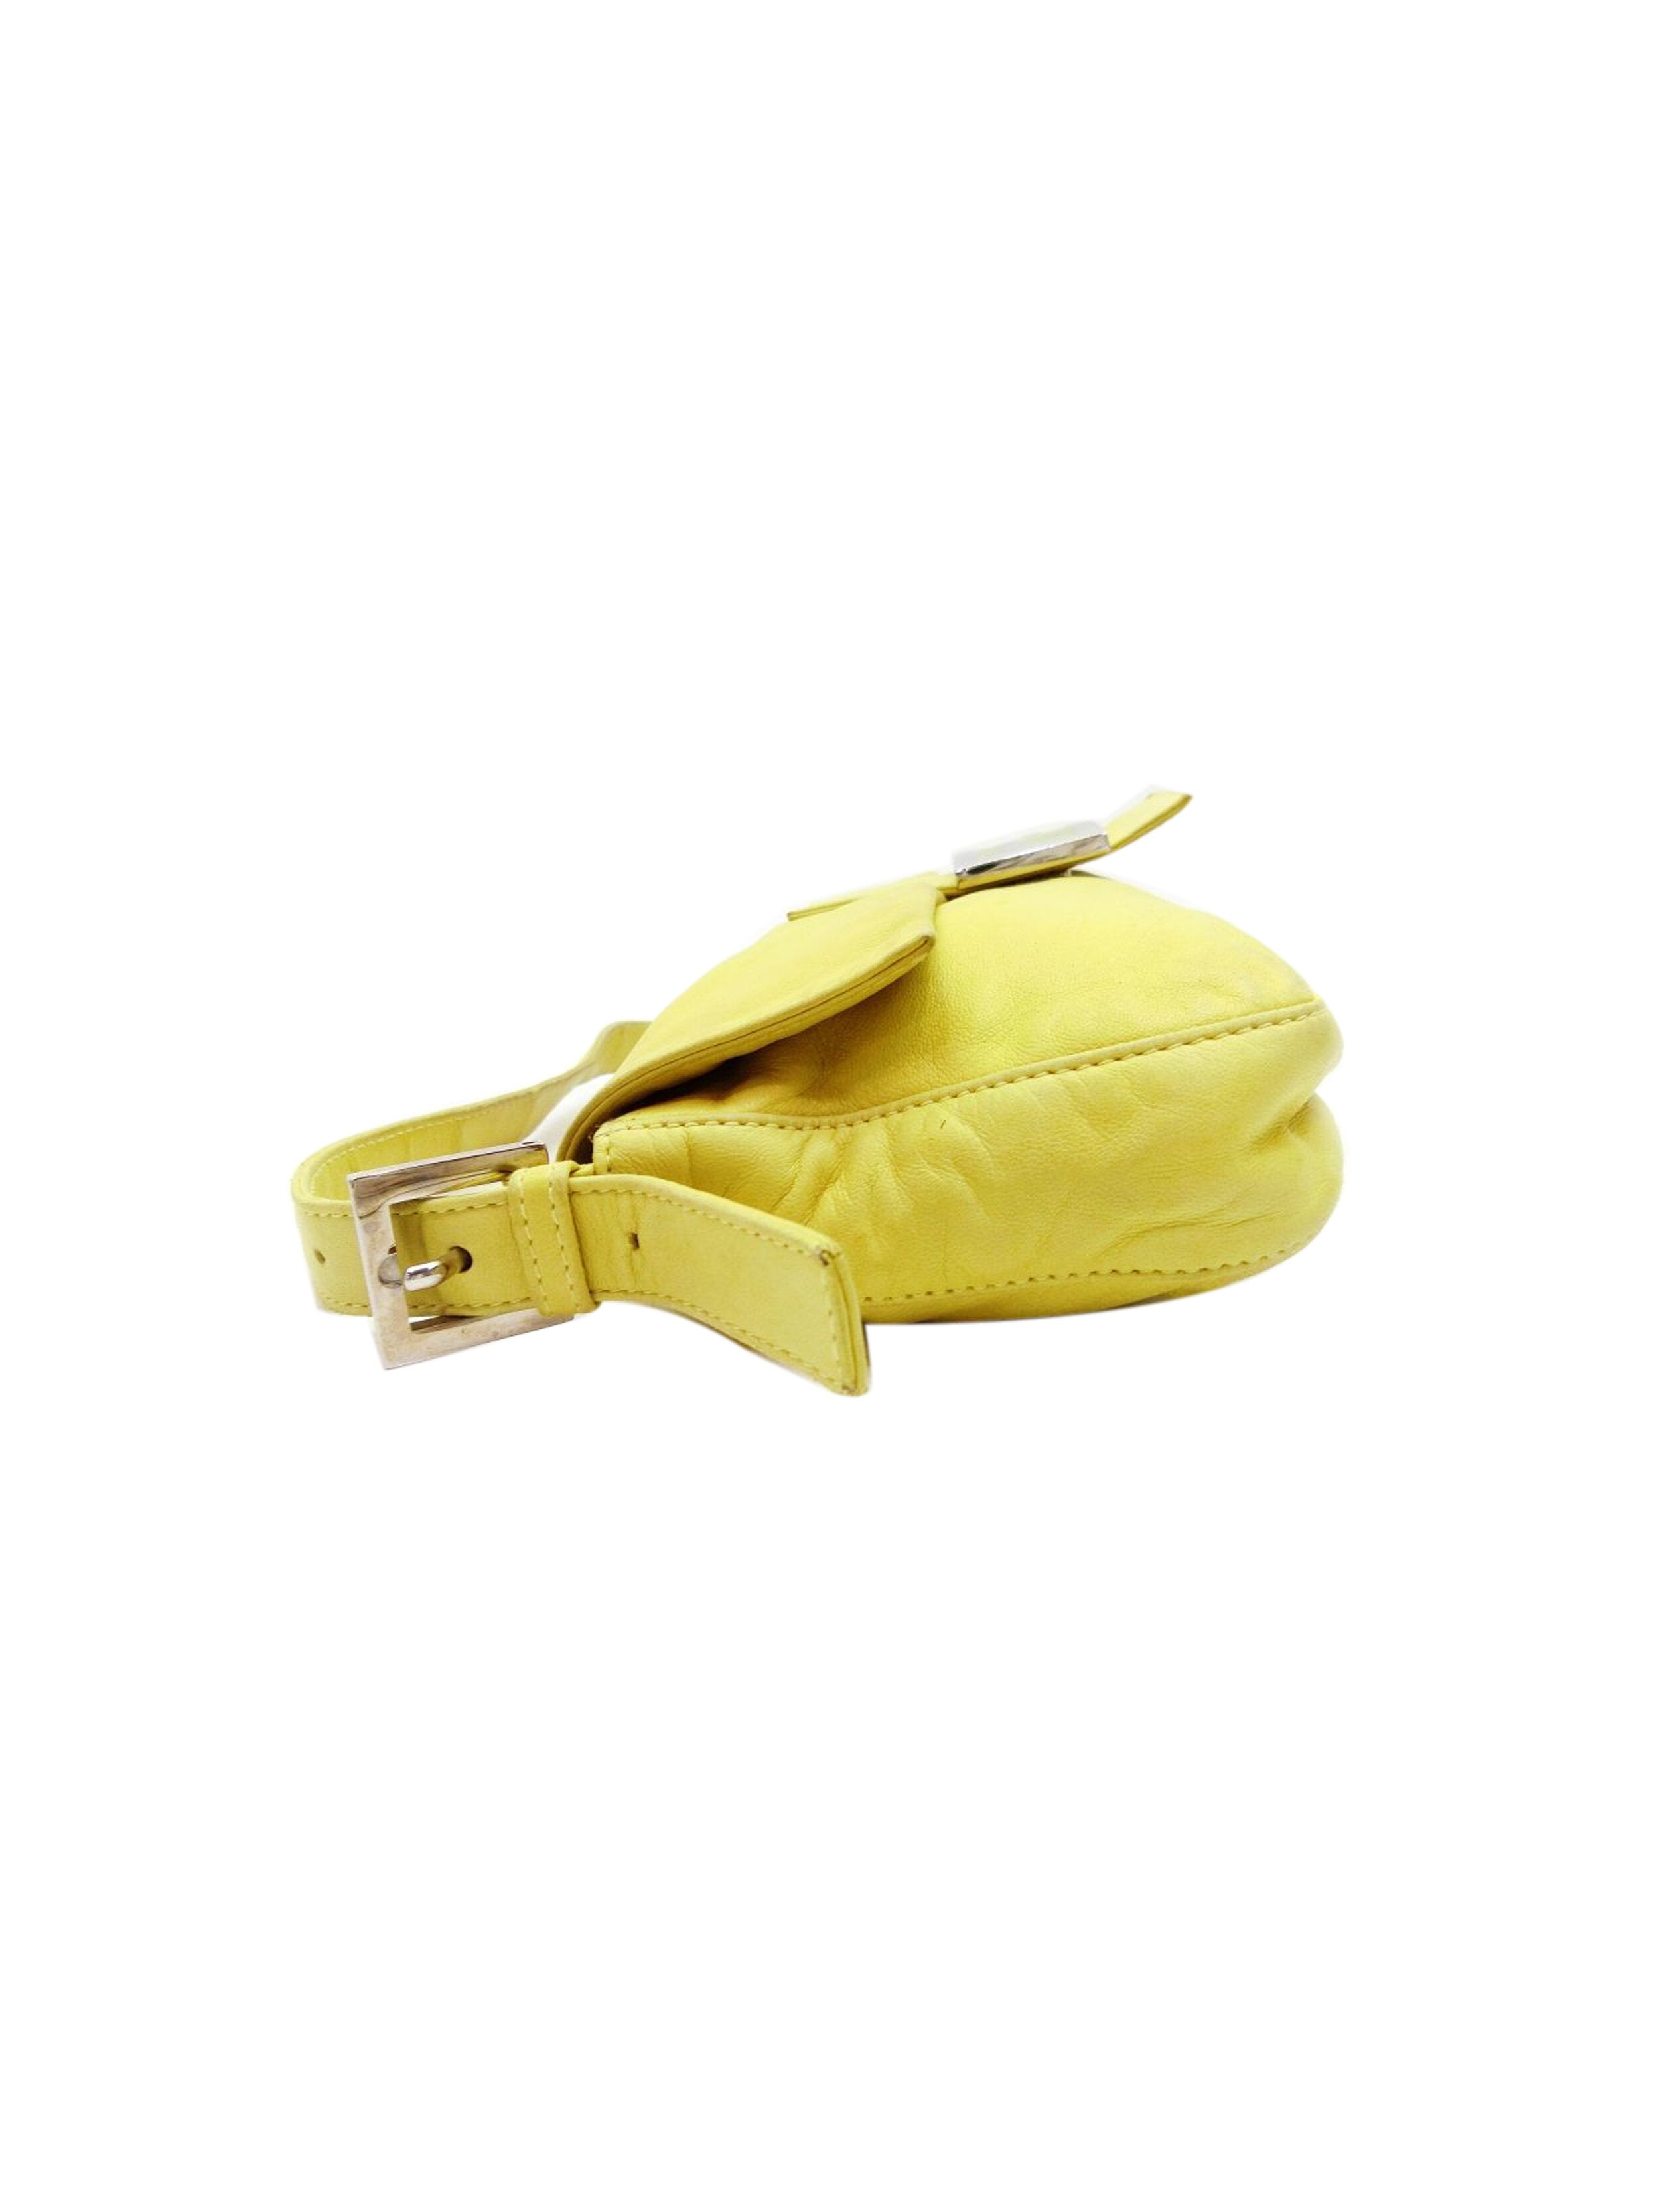 Fendi 2000s Yellow and Green Leather Baguette